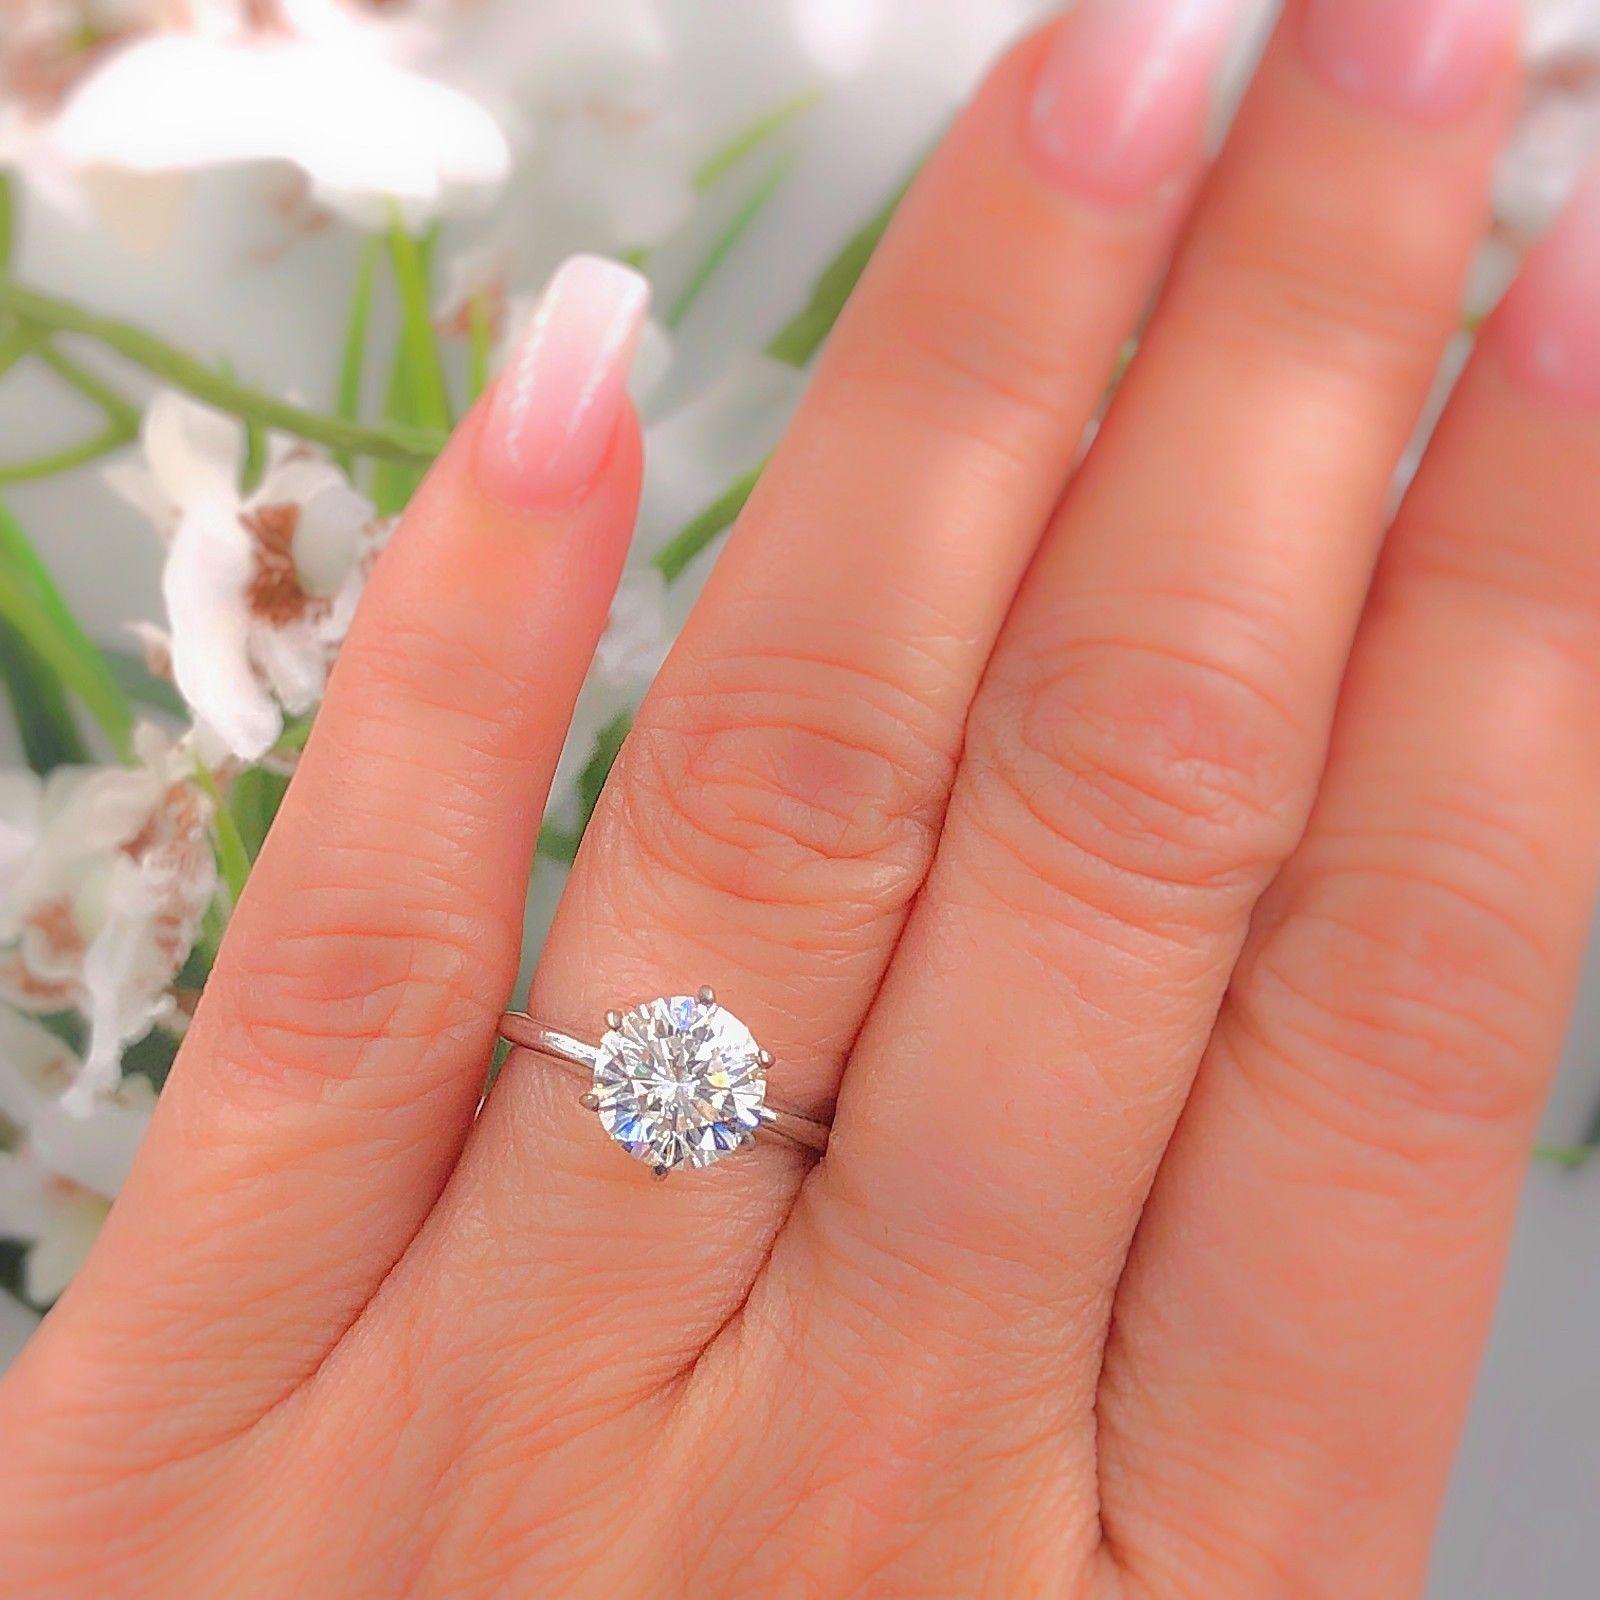 LEO DIAMOND in a Solitaire Engagement Ring

Style:  6 - Prong Solitaire
Serial Number:  LEO-191515
Metal:  14k White Gold 6-prong setting
Size:  6 - sizable
Total Carat Weight:  2.00 cts
Diamond Shape:  LEO Round Brilliant
Diamond Color & Clarity: 